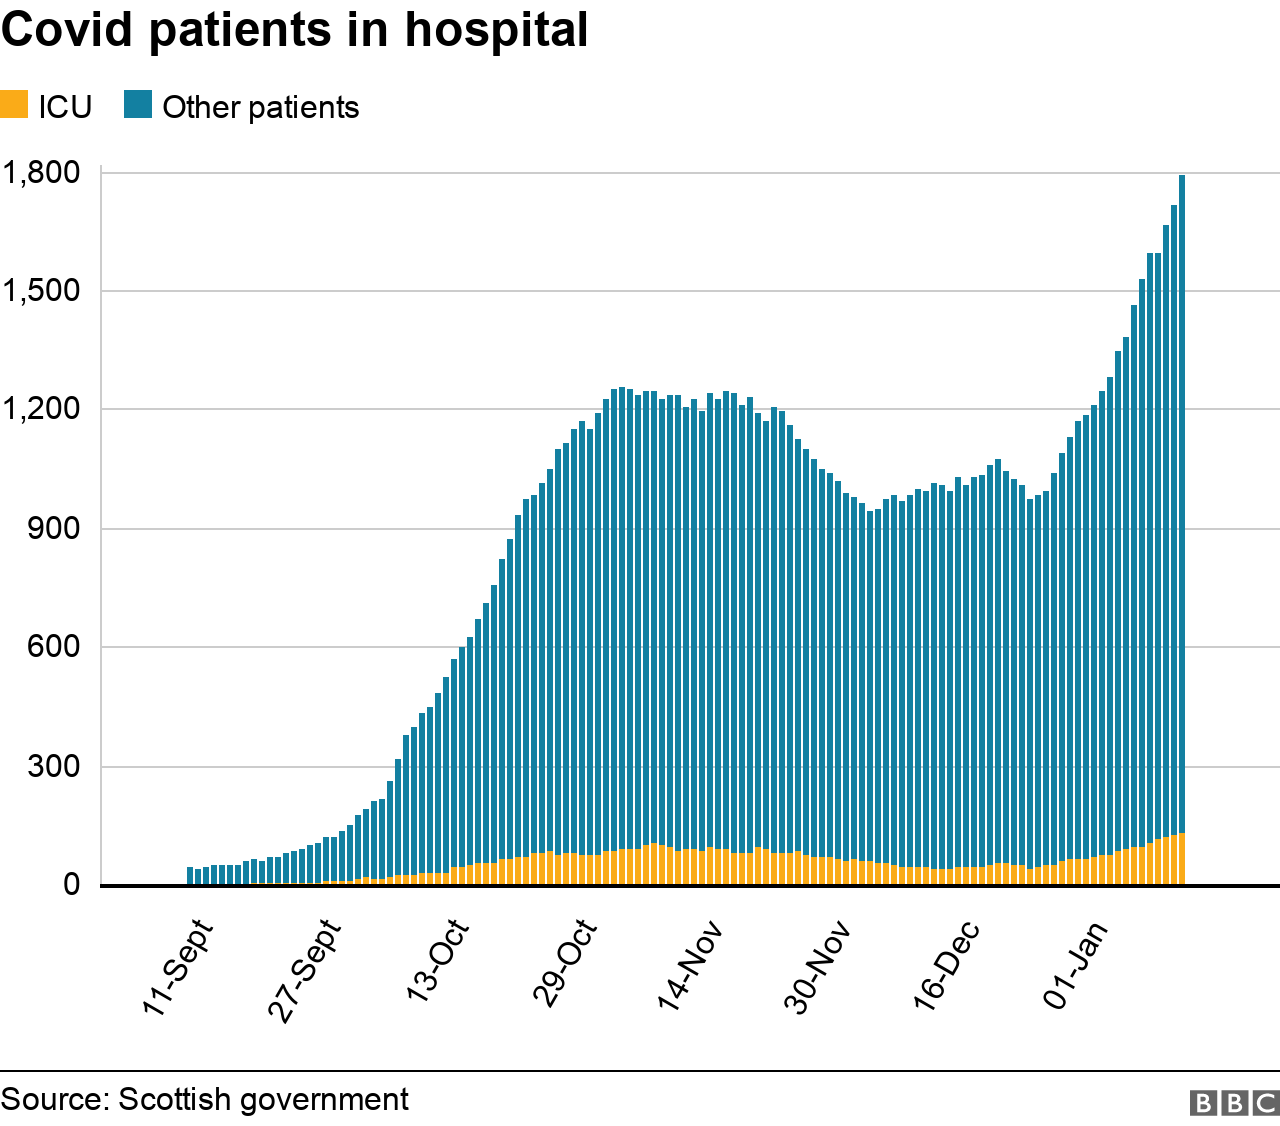 Covid patients in hospital